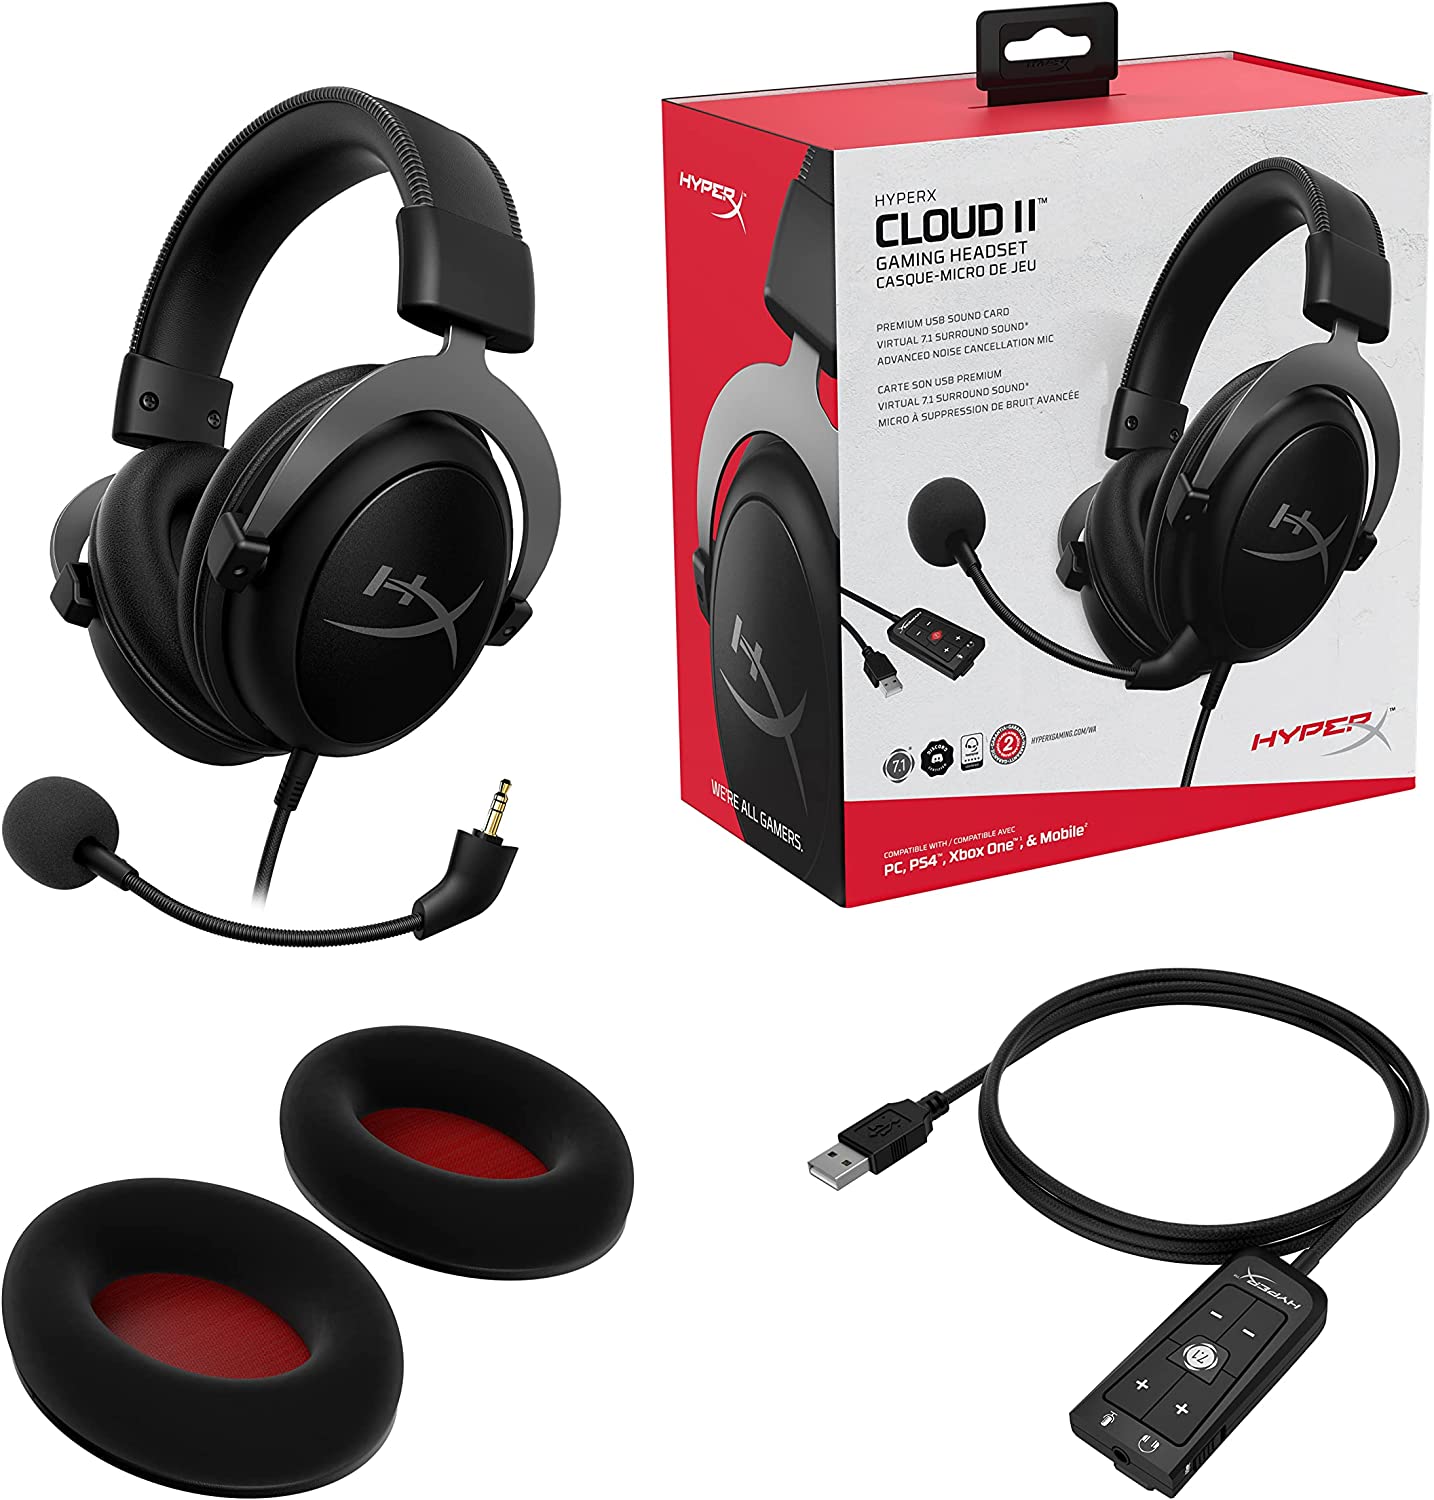 HyperX Cloud II Gaming Headset - 7.1 Surround Sound - Memory Foam Ear Pads - Durable Frame - Works With PC, PS4, PS4 PRO, Xbox One S - Gun